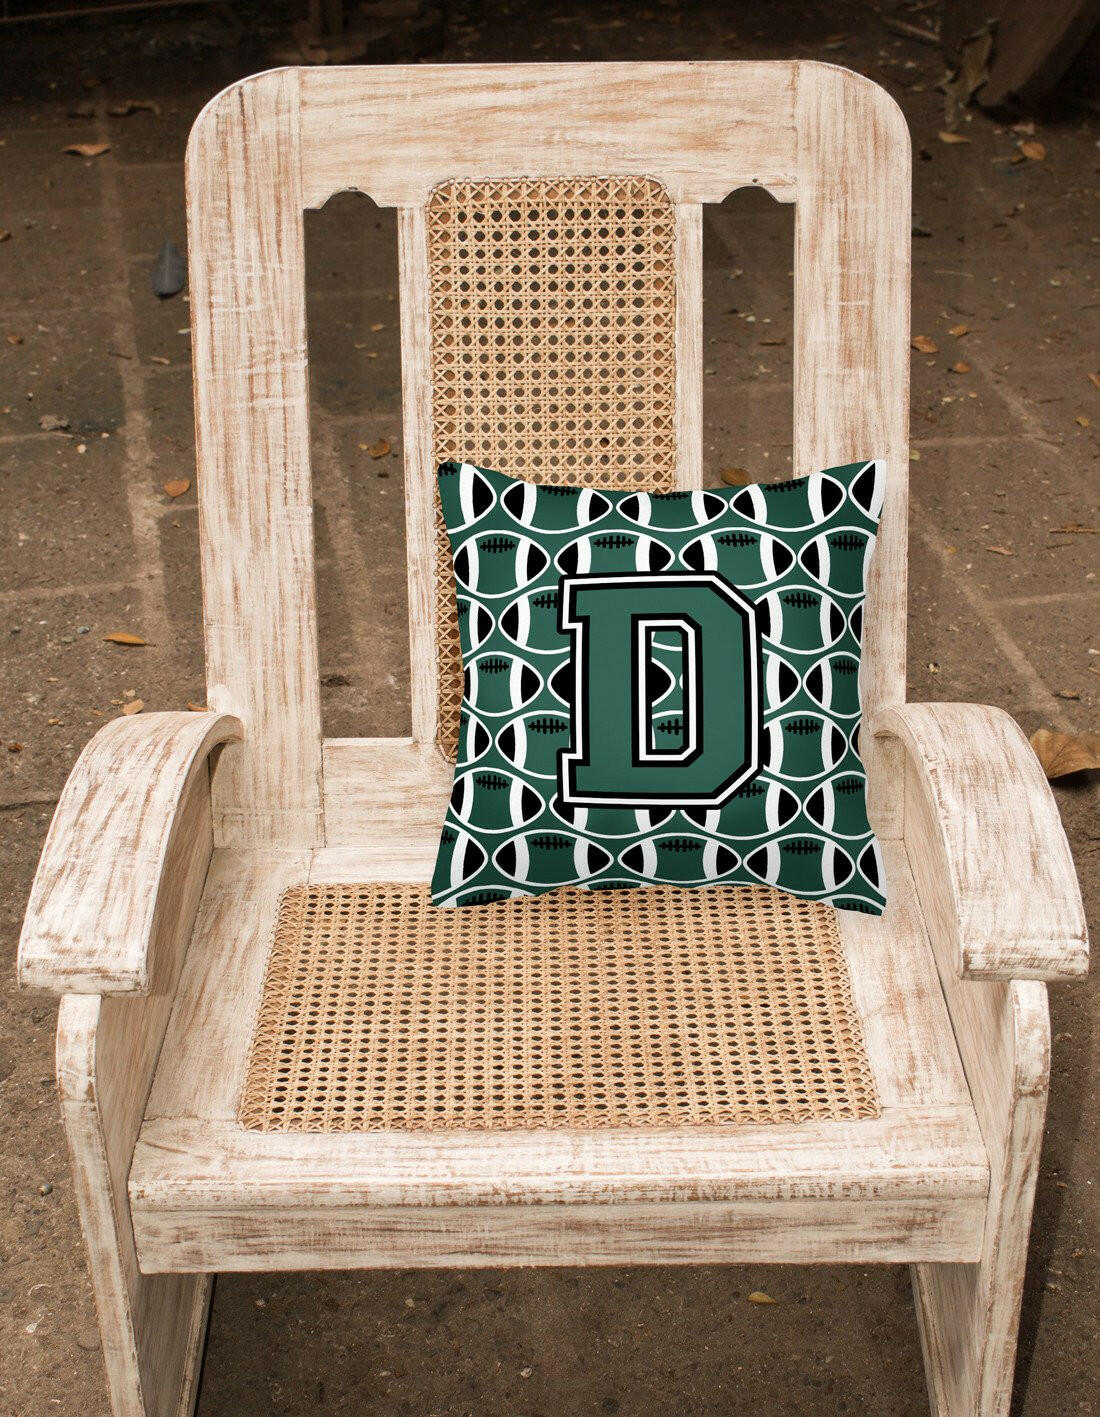 Letter D Football Green and White Fabric Decorative Pillow CJ1071-DPW1414 by Caroline's Treasures